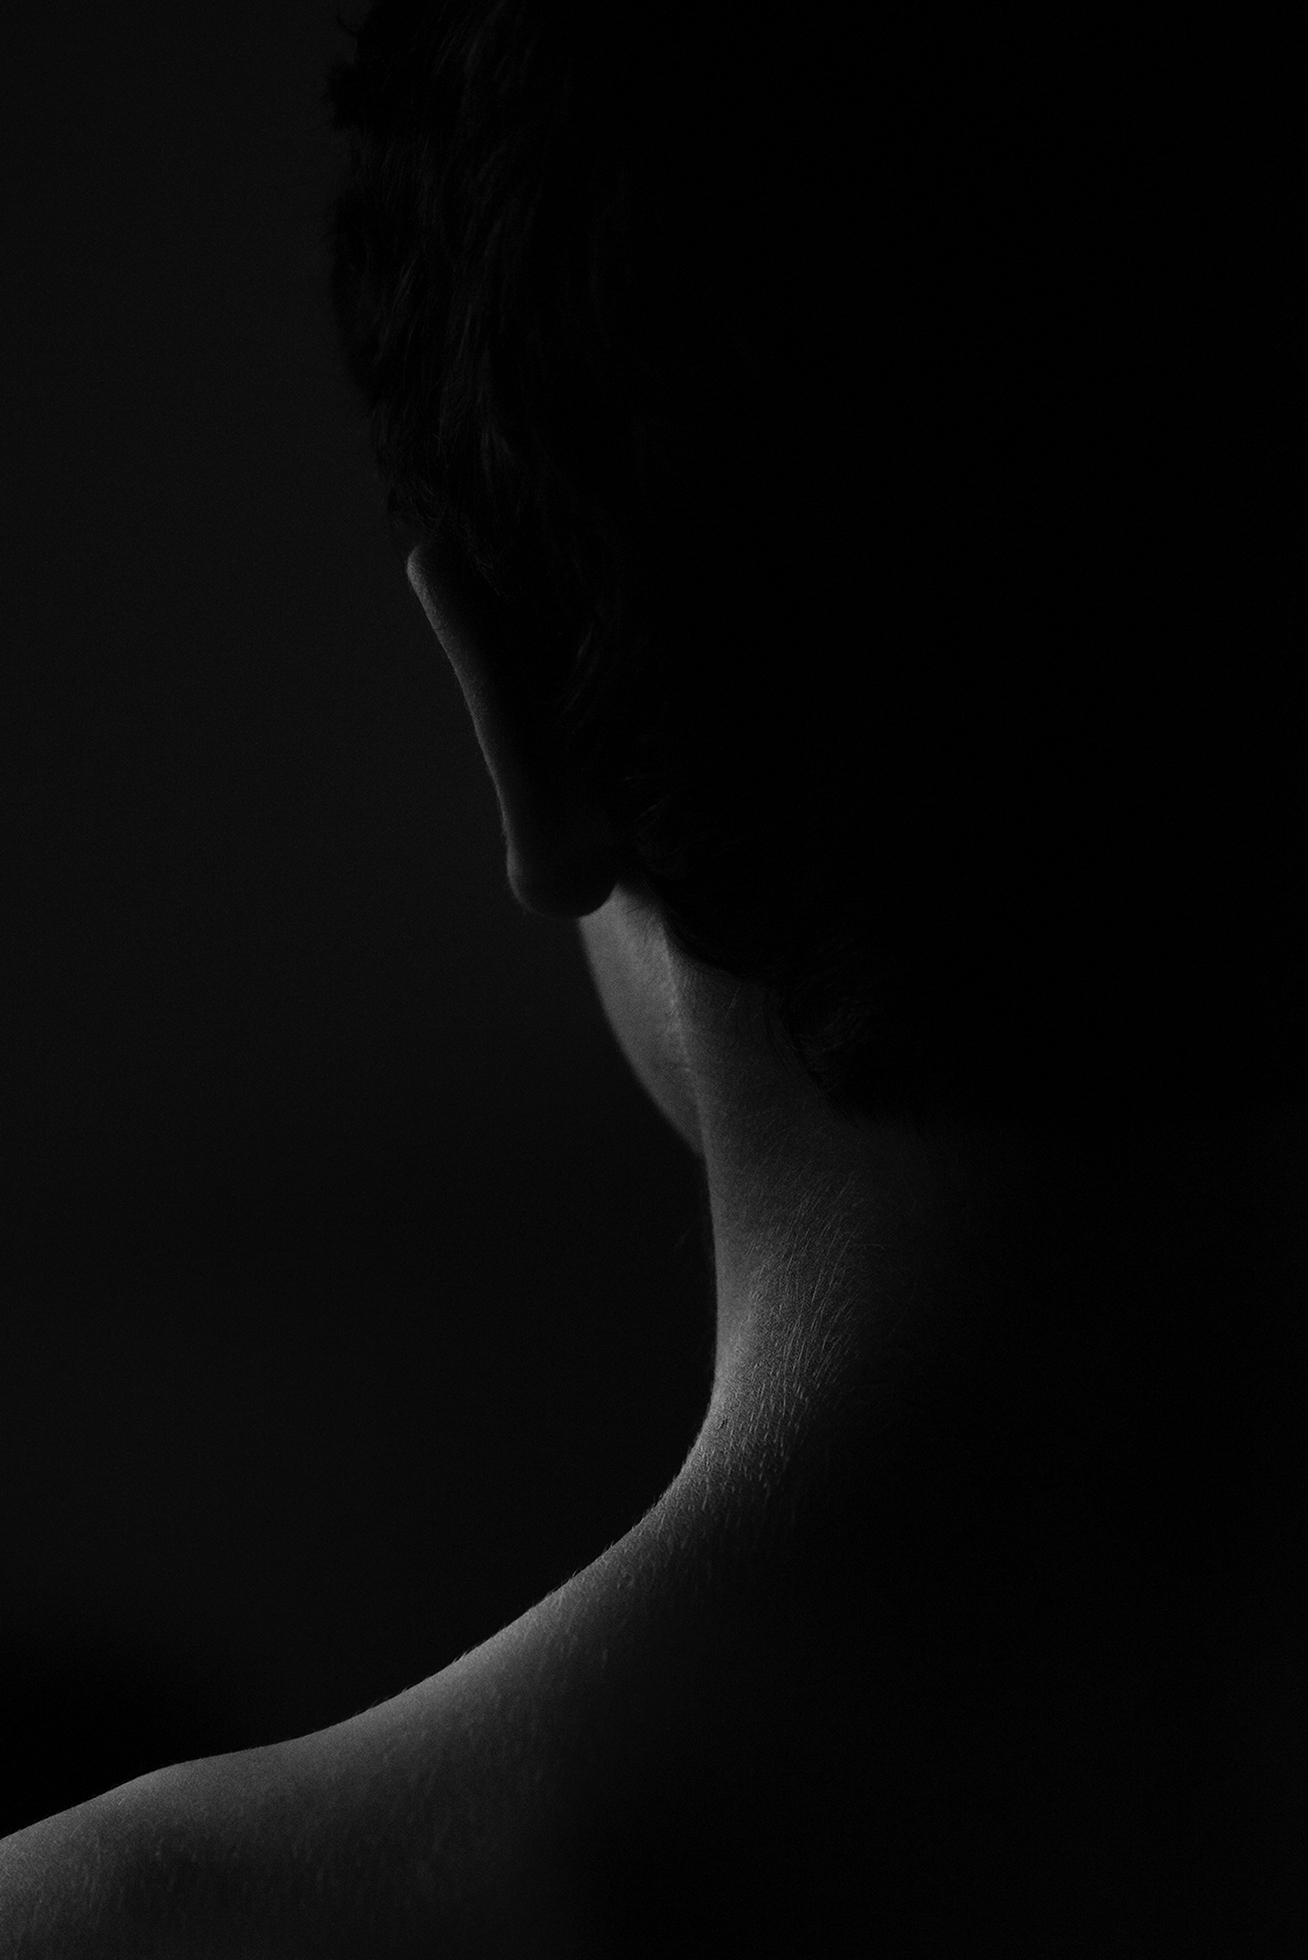 The back view of the darkened silhouette of the left side of a man from his bare shoulder up.